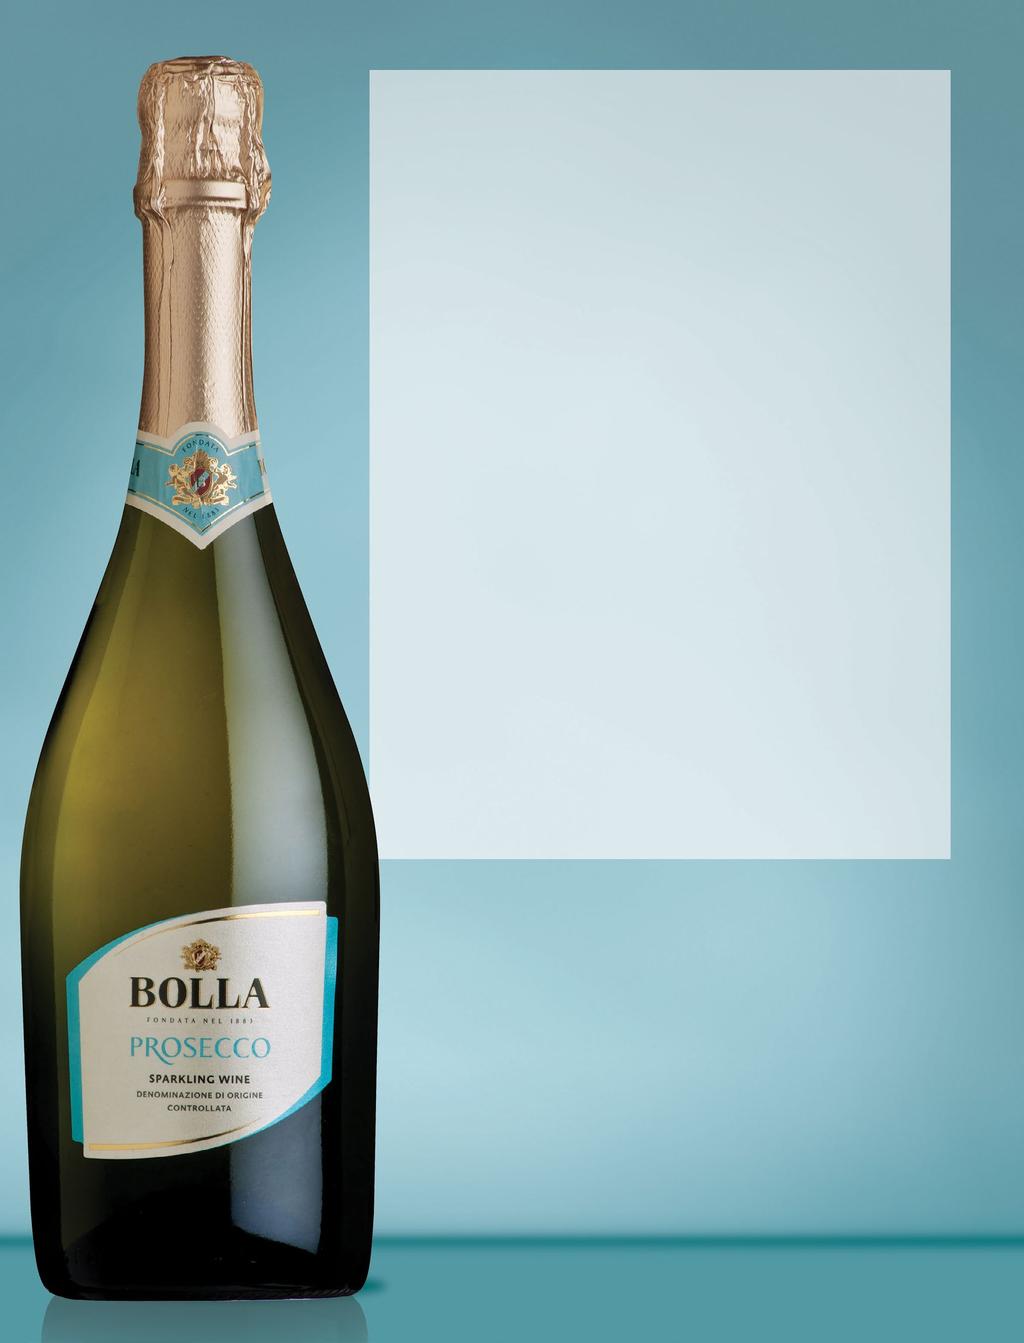 S U P E R P RP RE EMM II U M T I E R PROSECCO DESCRIPTION SHEET Bolla Prosecco DOC Extra Dry Production Area: Grape Varieties: Description: Treviso (Vineyards in the area of Treviso, north of Venice).